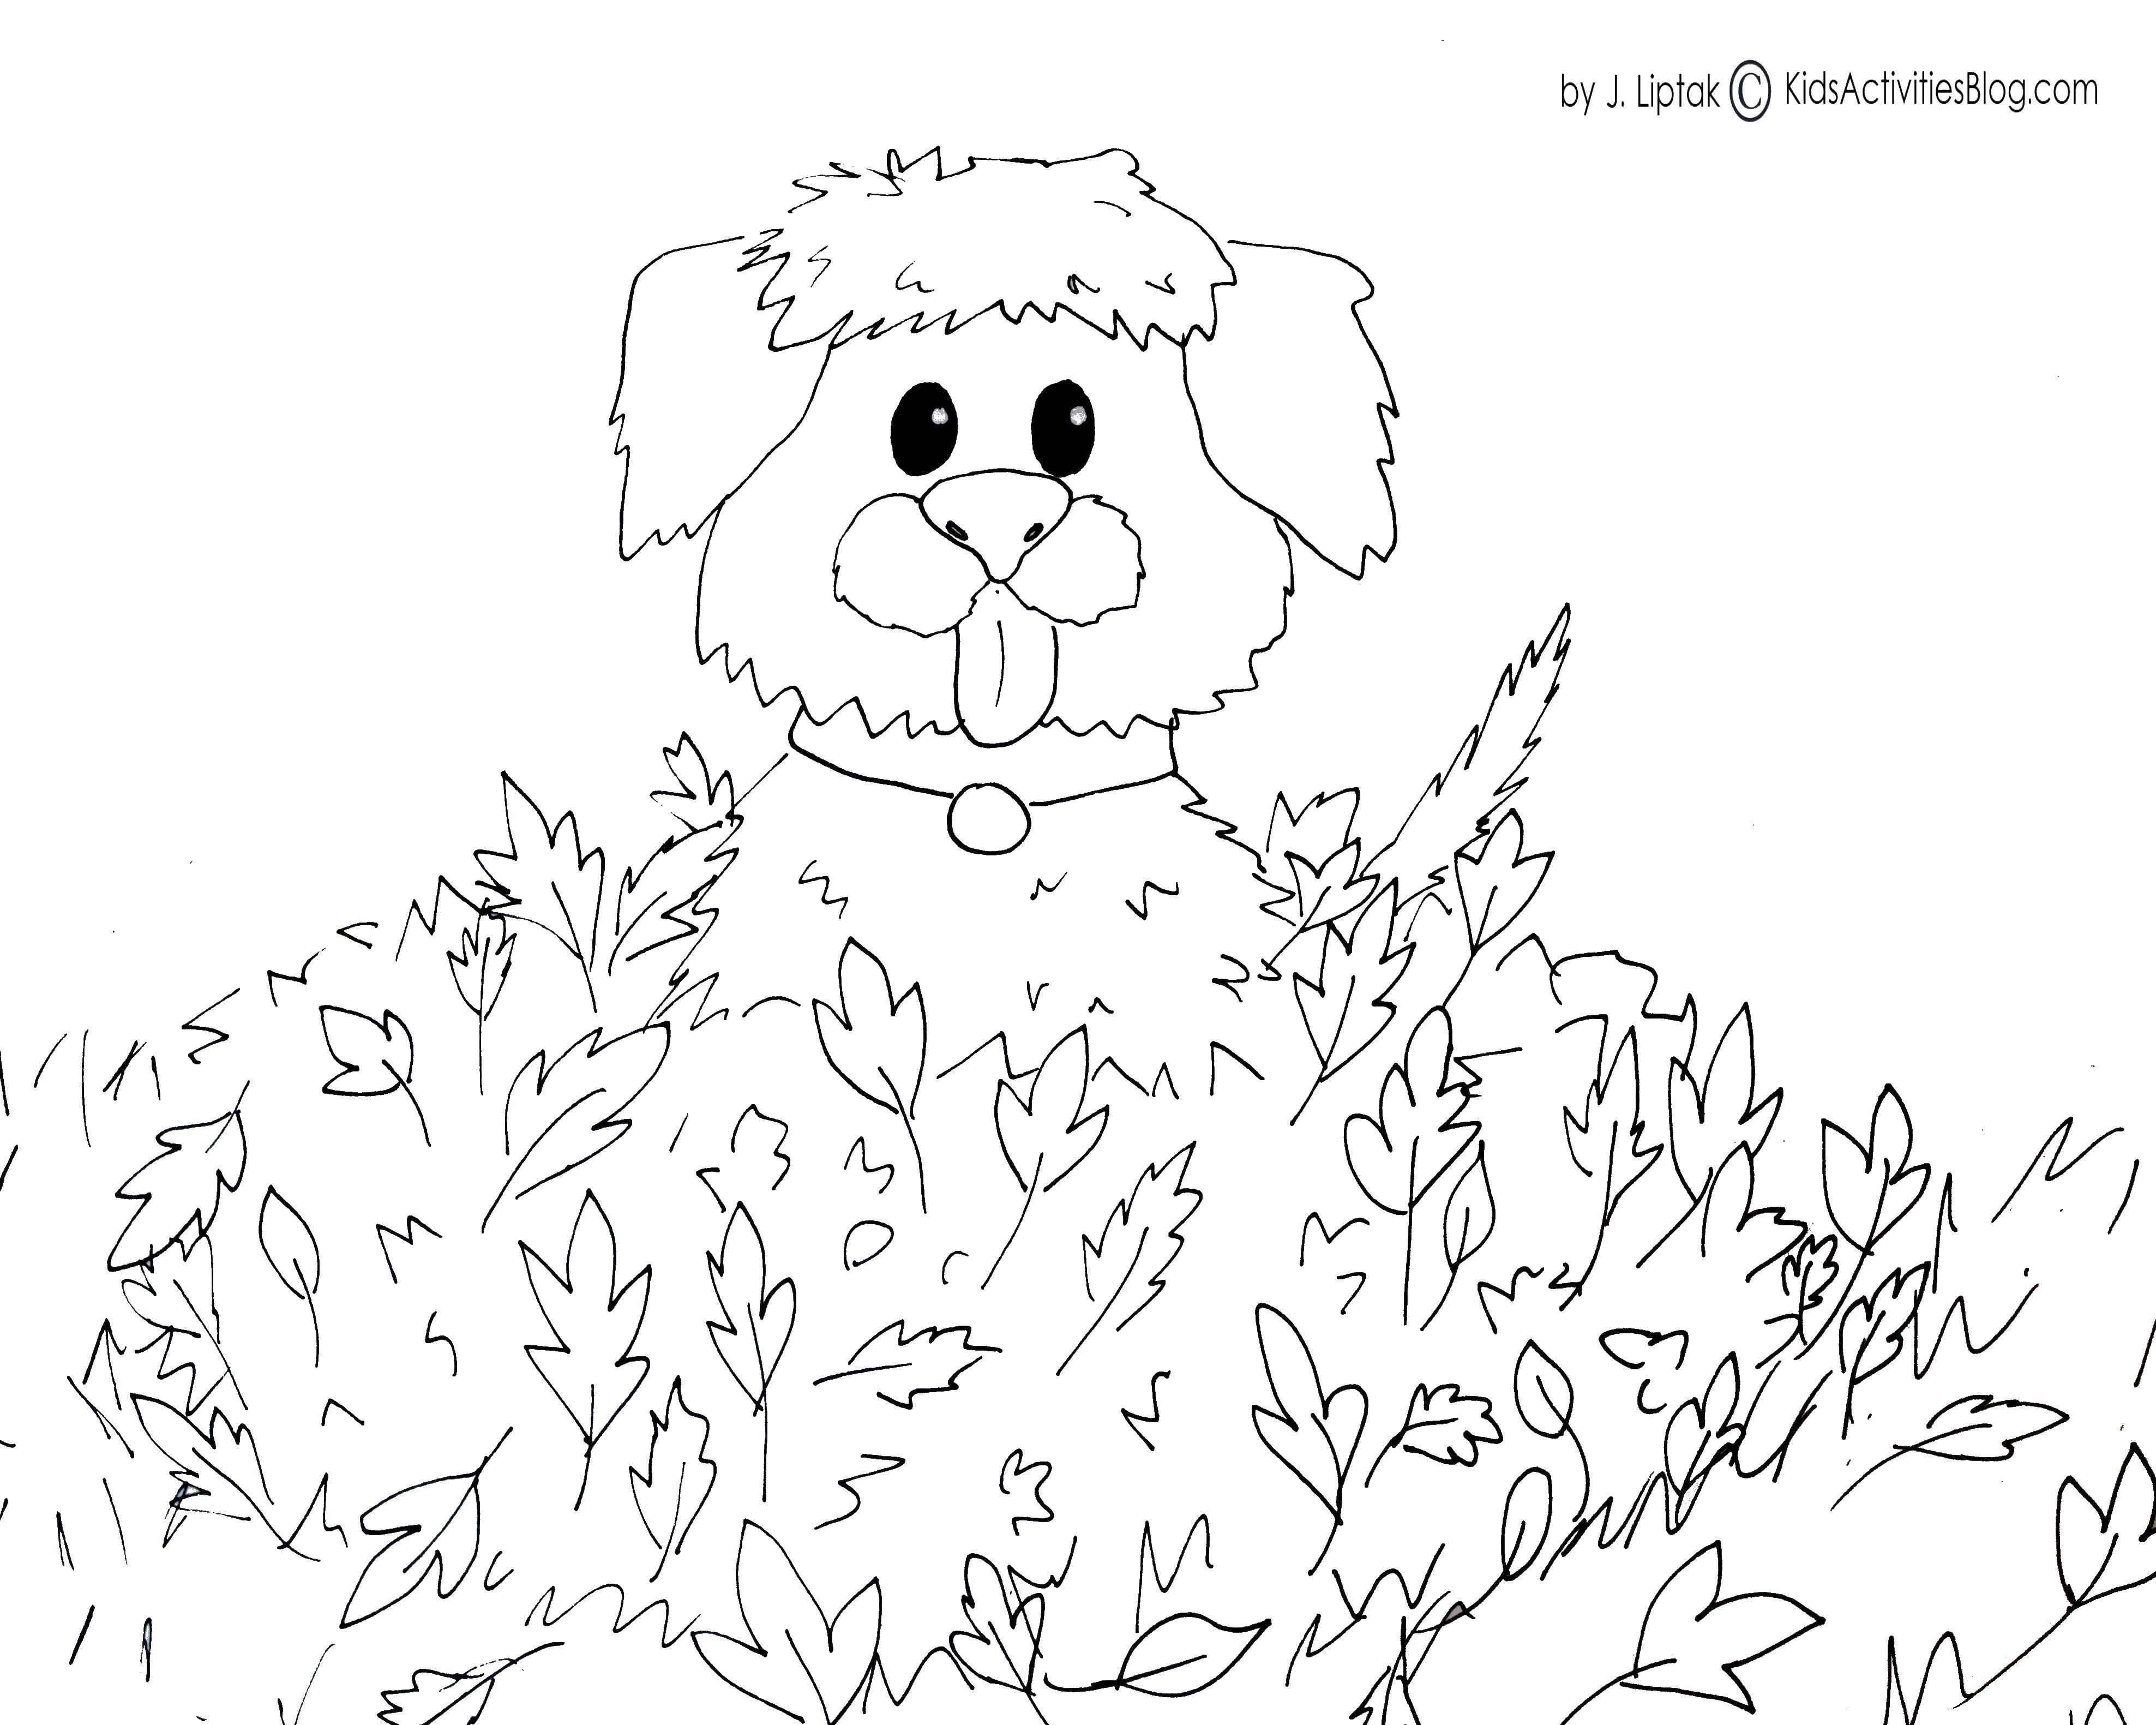 Coloring Doggy in the leaves. Category leaves. Tags:  leaves, dog.